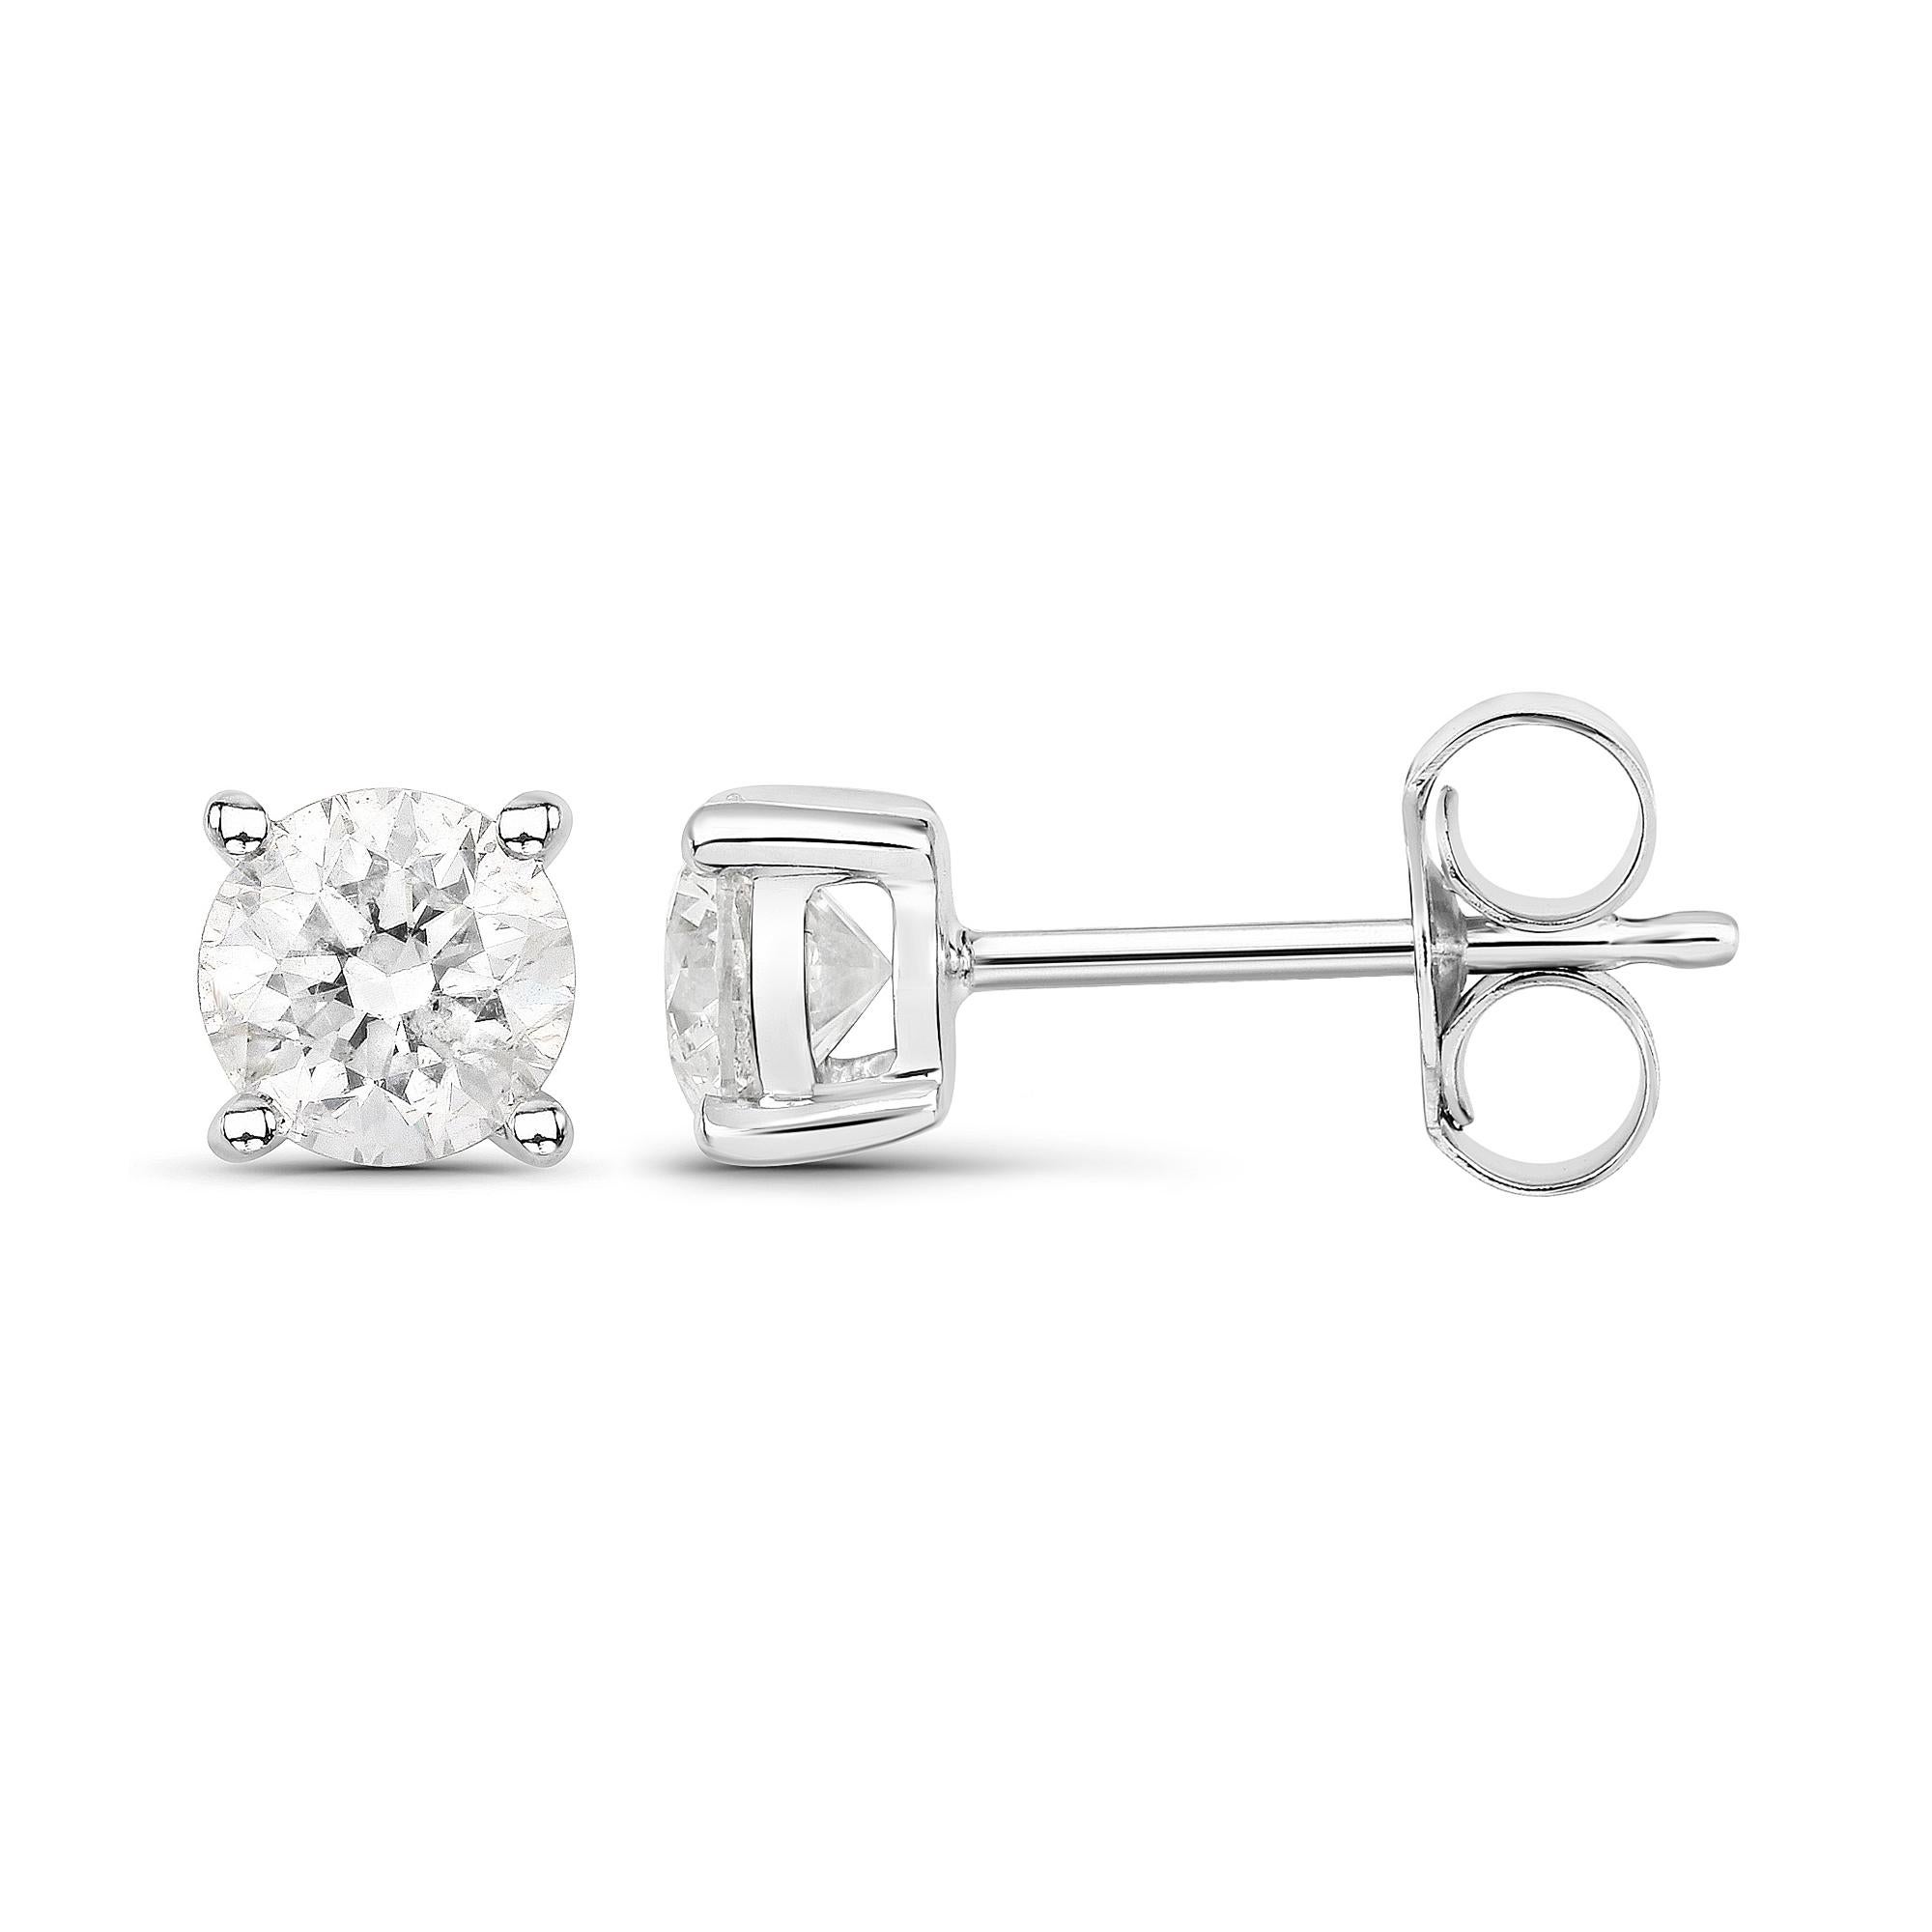 Flaunt yourself with these white diamond stud earrings. The natural gemstones have a combined weight of 0.80 carats and are set in 14K white gold. The white hue of these earrings adds a pop of color to any look! The understated design and vibrant